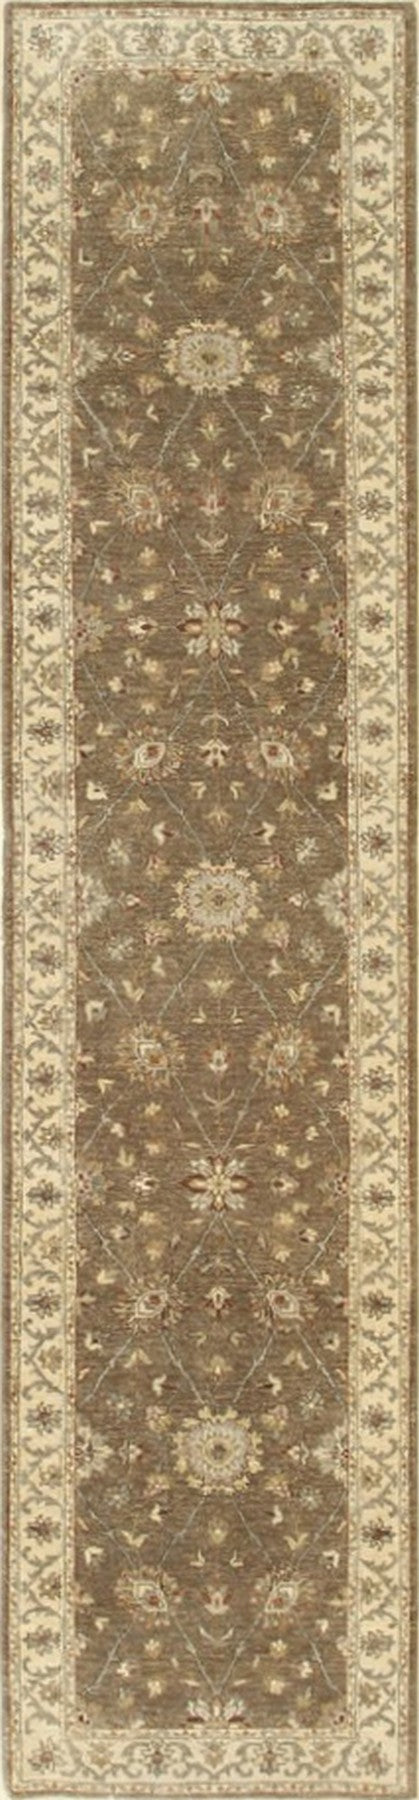 Brown Hand Knotted Wool Traditional Agra Rug, Made in India